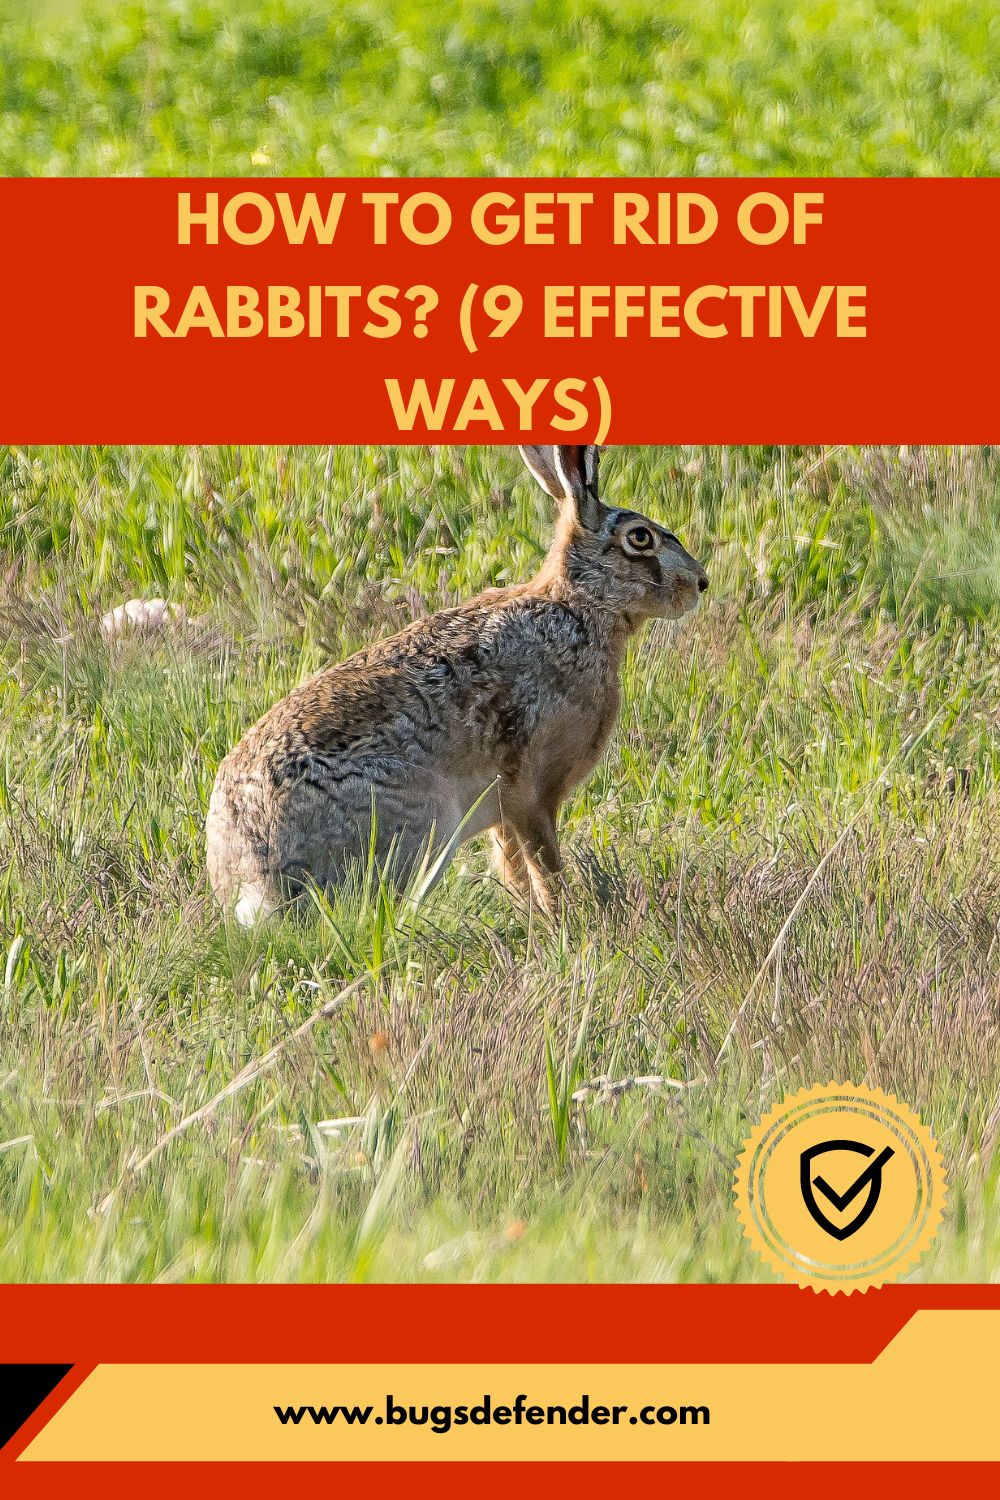 How To Get Rid Of Rabbits? (9 Effective Ways) pin2